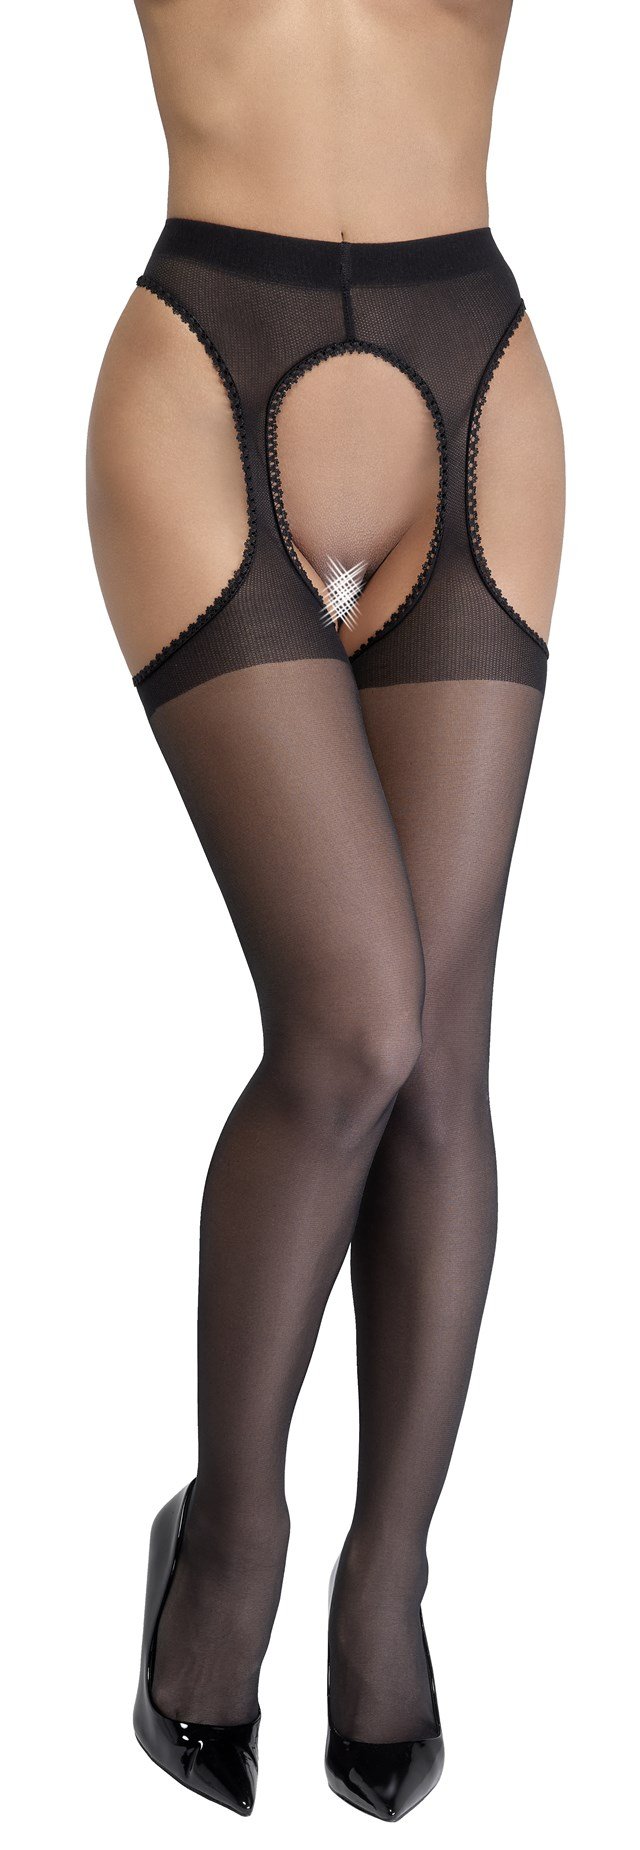 Open Crotch Suspender Stockings